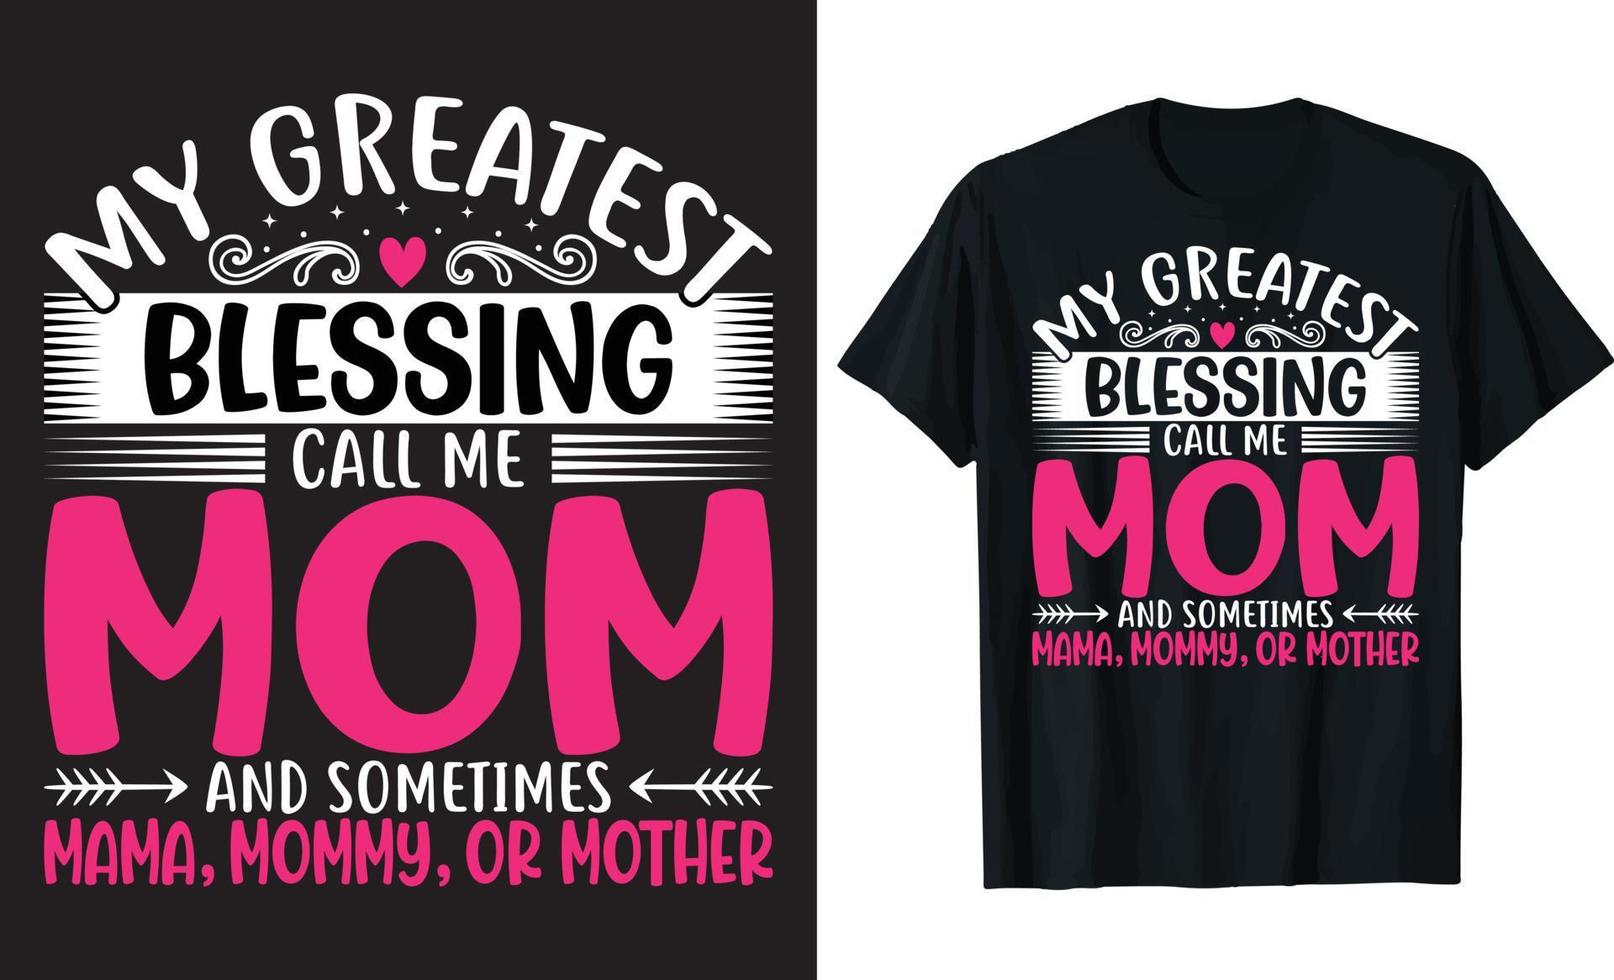 My Greatest Blessing Call Me Mom And Sometimes Mama, Mommy, Or Mother - Mother's Day T-shirt design vector